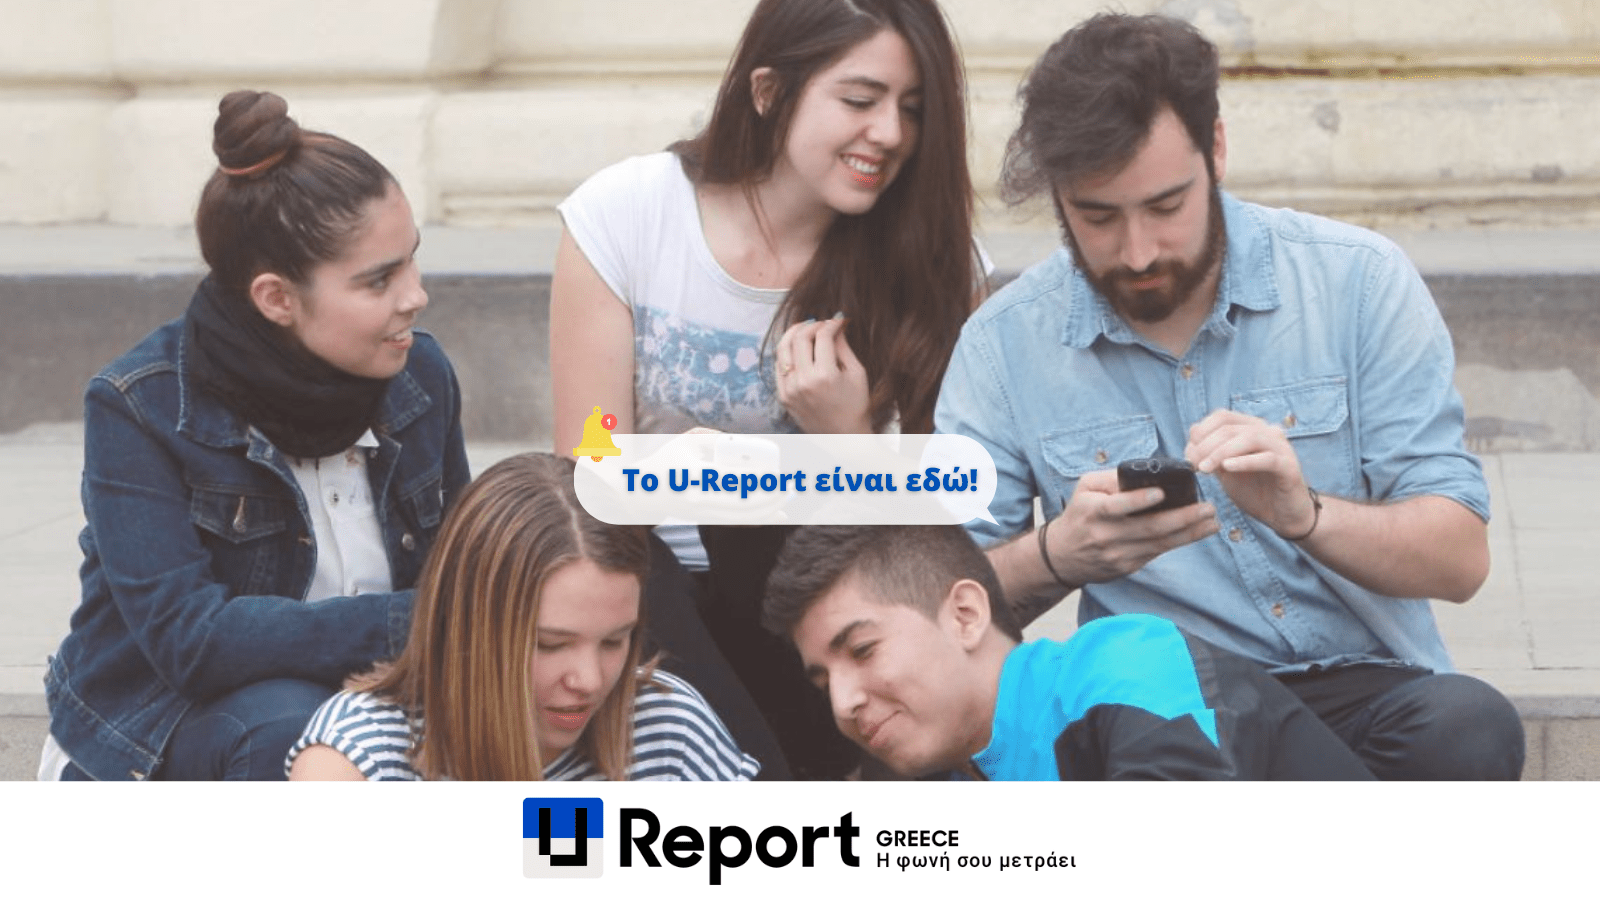 U-Report is coming to Greece